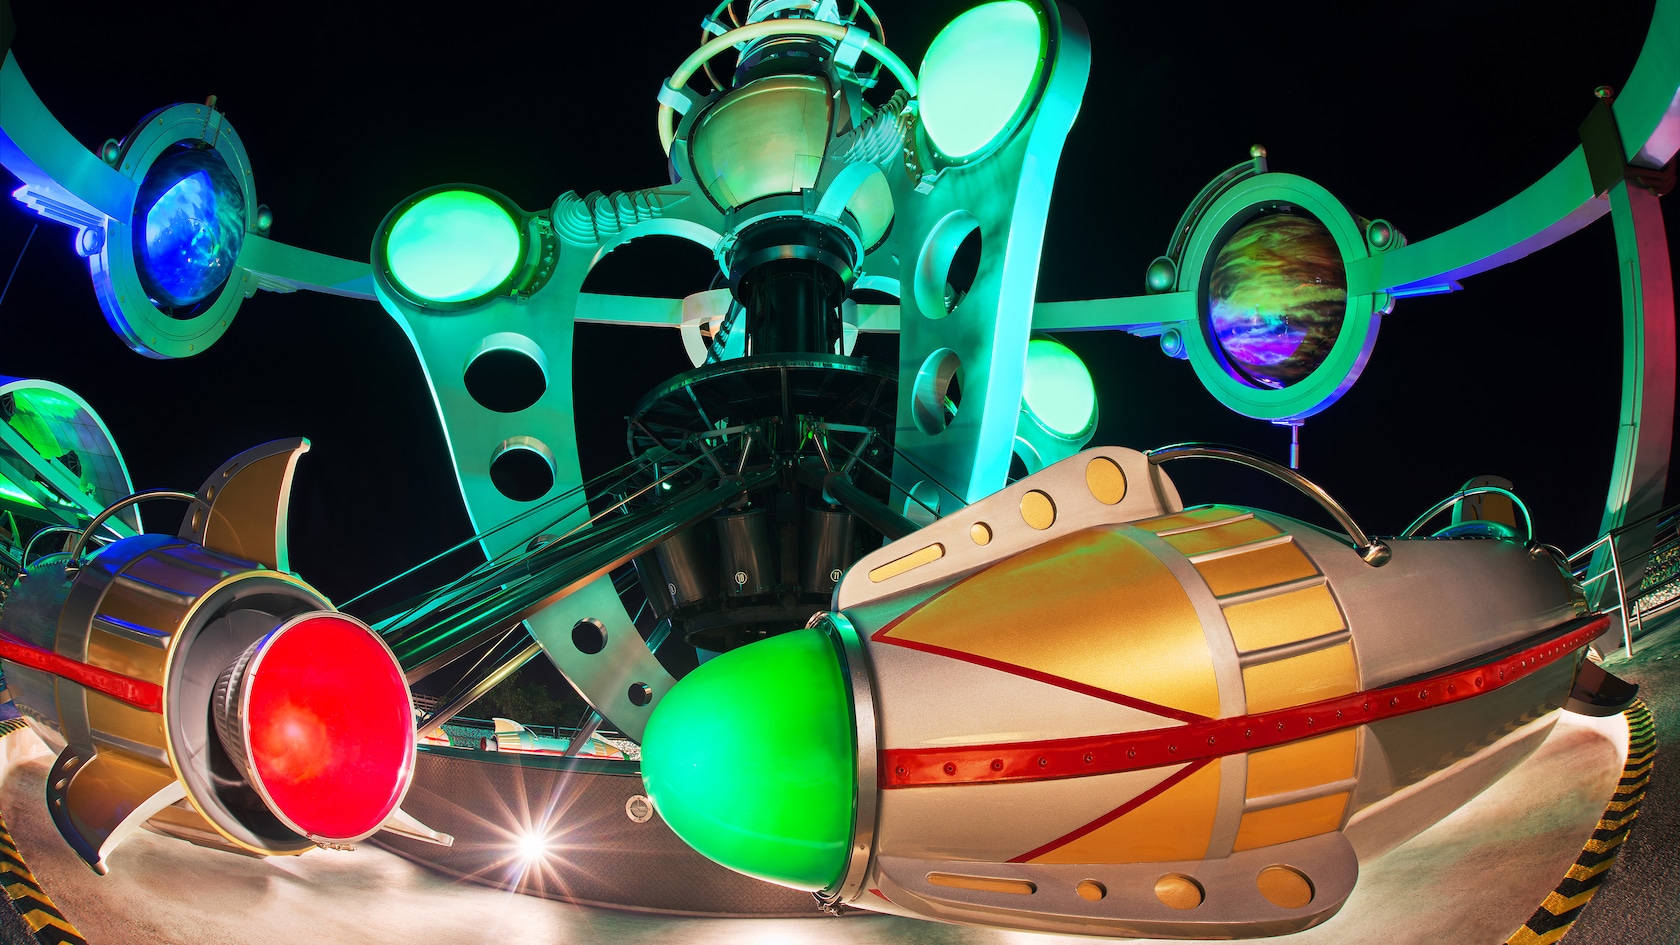 images for astro orbiter at tomorrow land in magic kingdom